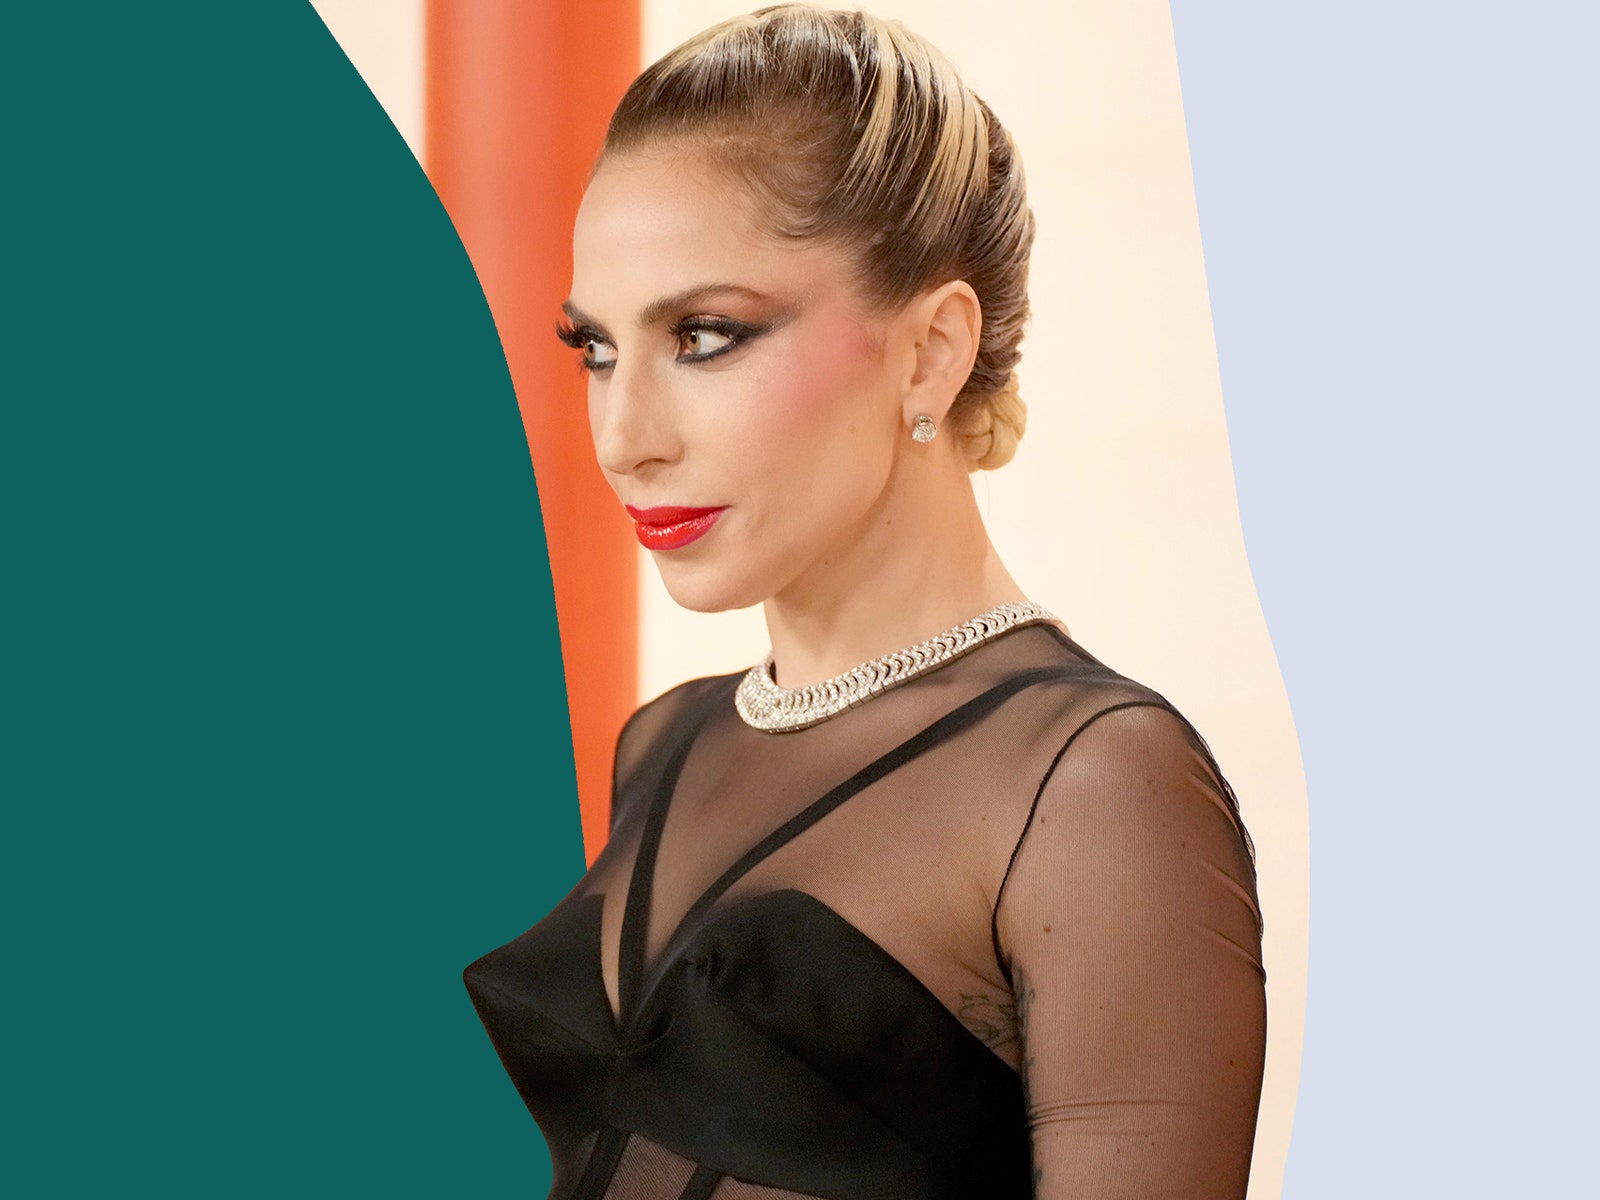 Lady Gaga just shared stunning makeup-free selfies to sell you makeup